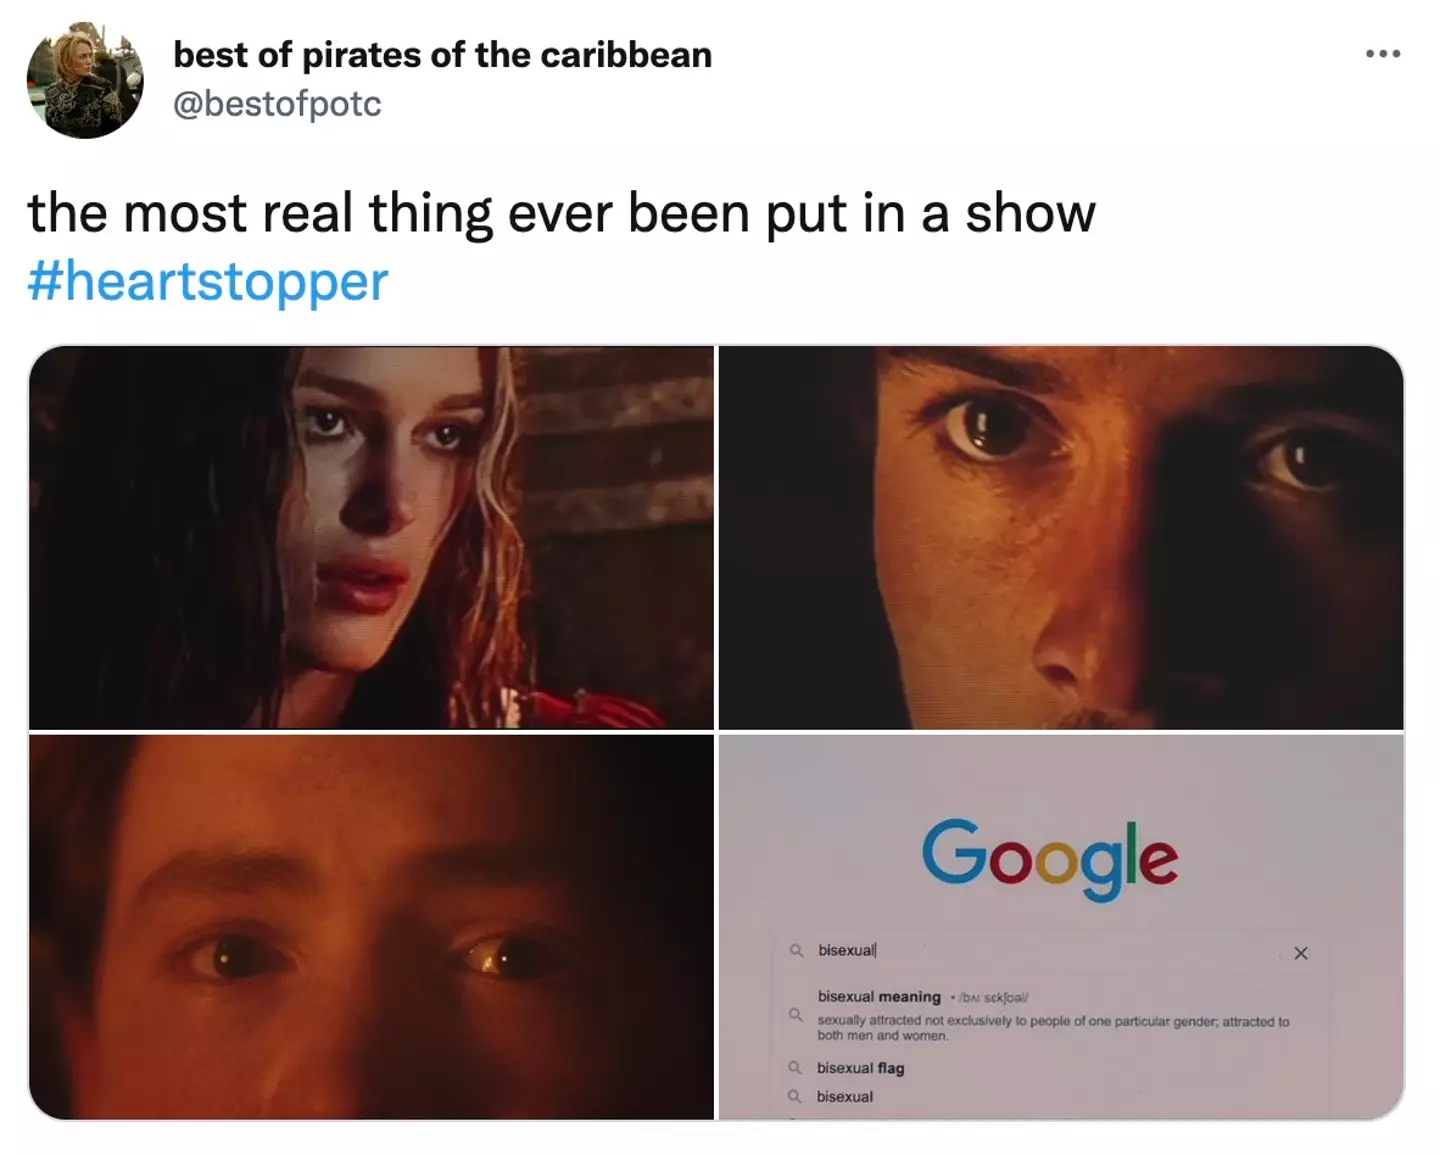 In this particular scene, the main character Nick Nelson watches Pirates of the Caribbean - one of his favourite movies - and finds himself in ‘a bisexual panic’ over actors Keira Knightly and Orlando Bloom (Twitter @bestofpotc).